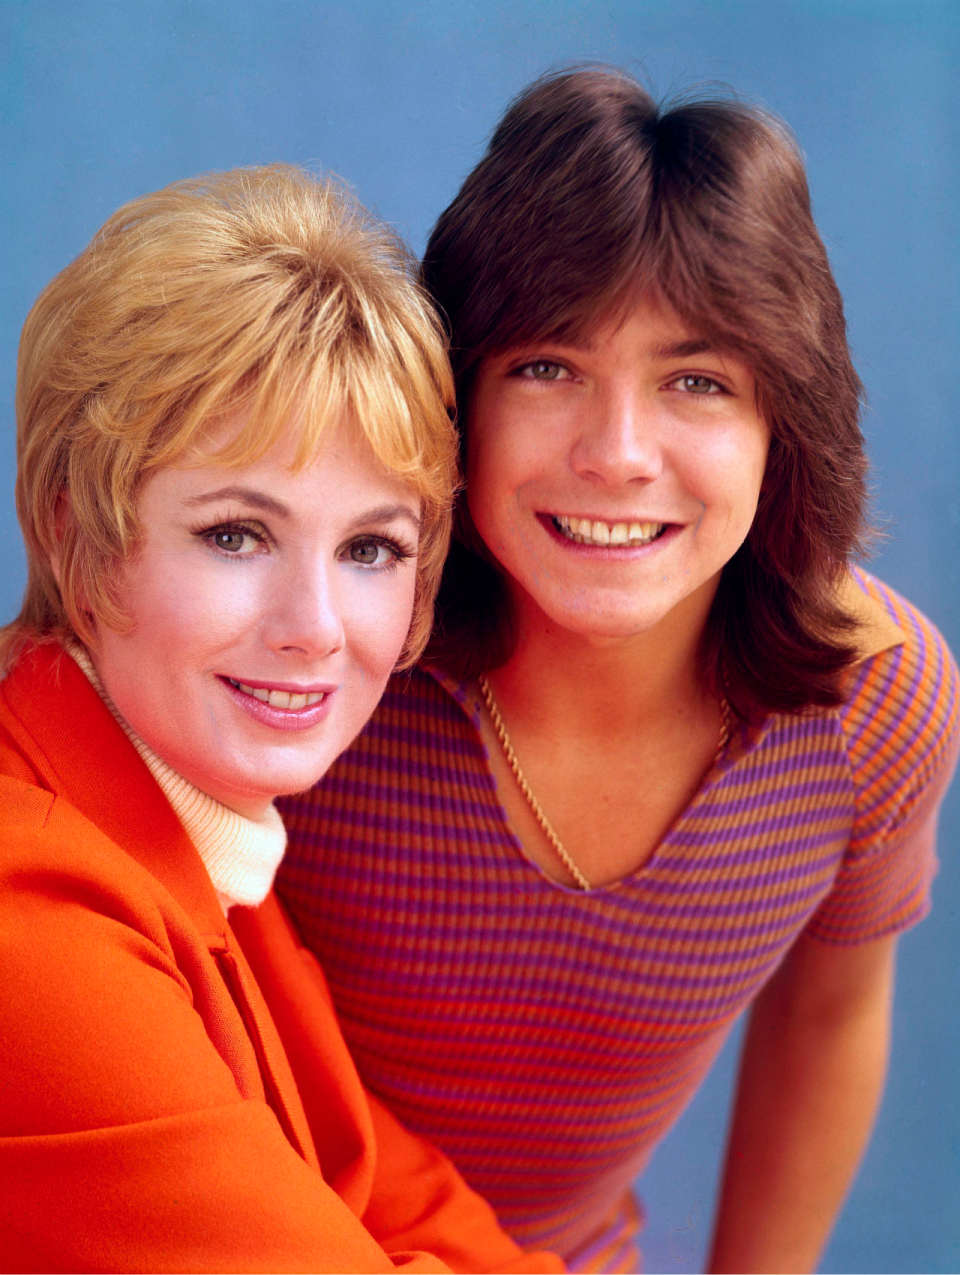 Jones played Cassidy's mom on 'The Partridge Family' and was his stepmom in real life.